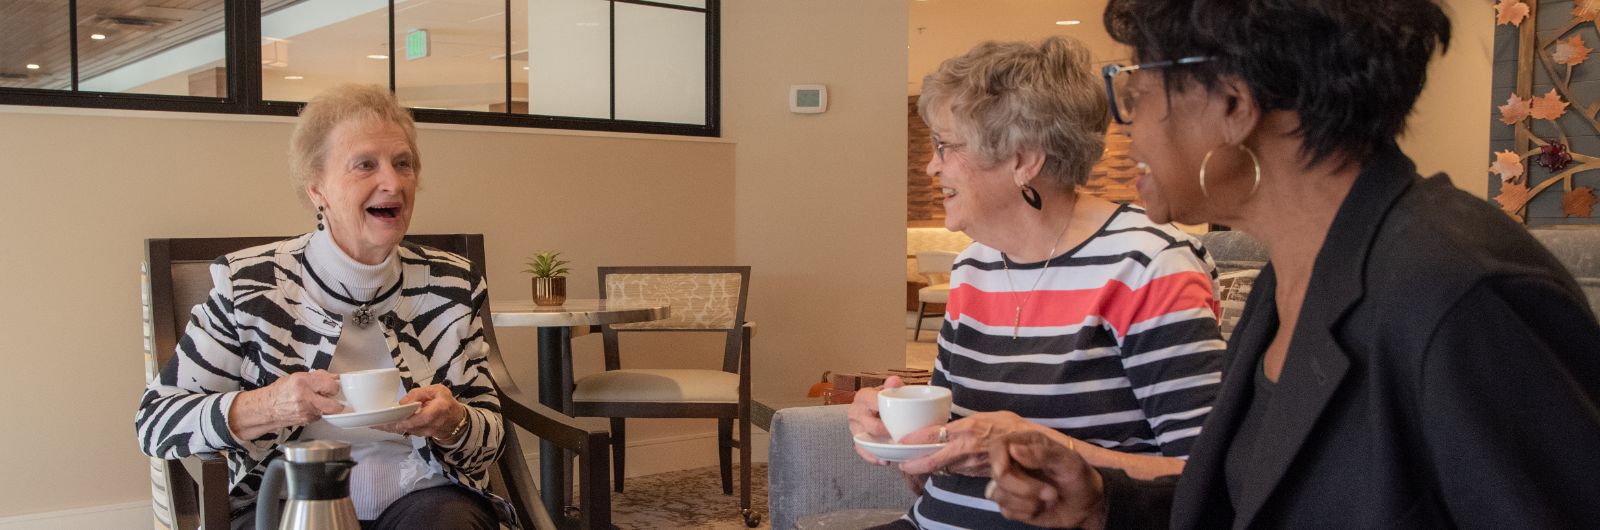 Clermont Park Senior Living Community in Denver, CO - where to begin benefits of community life